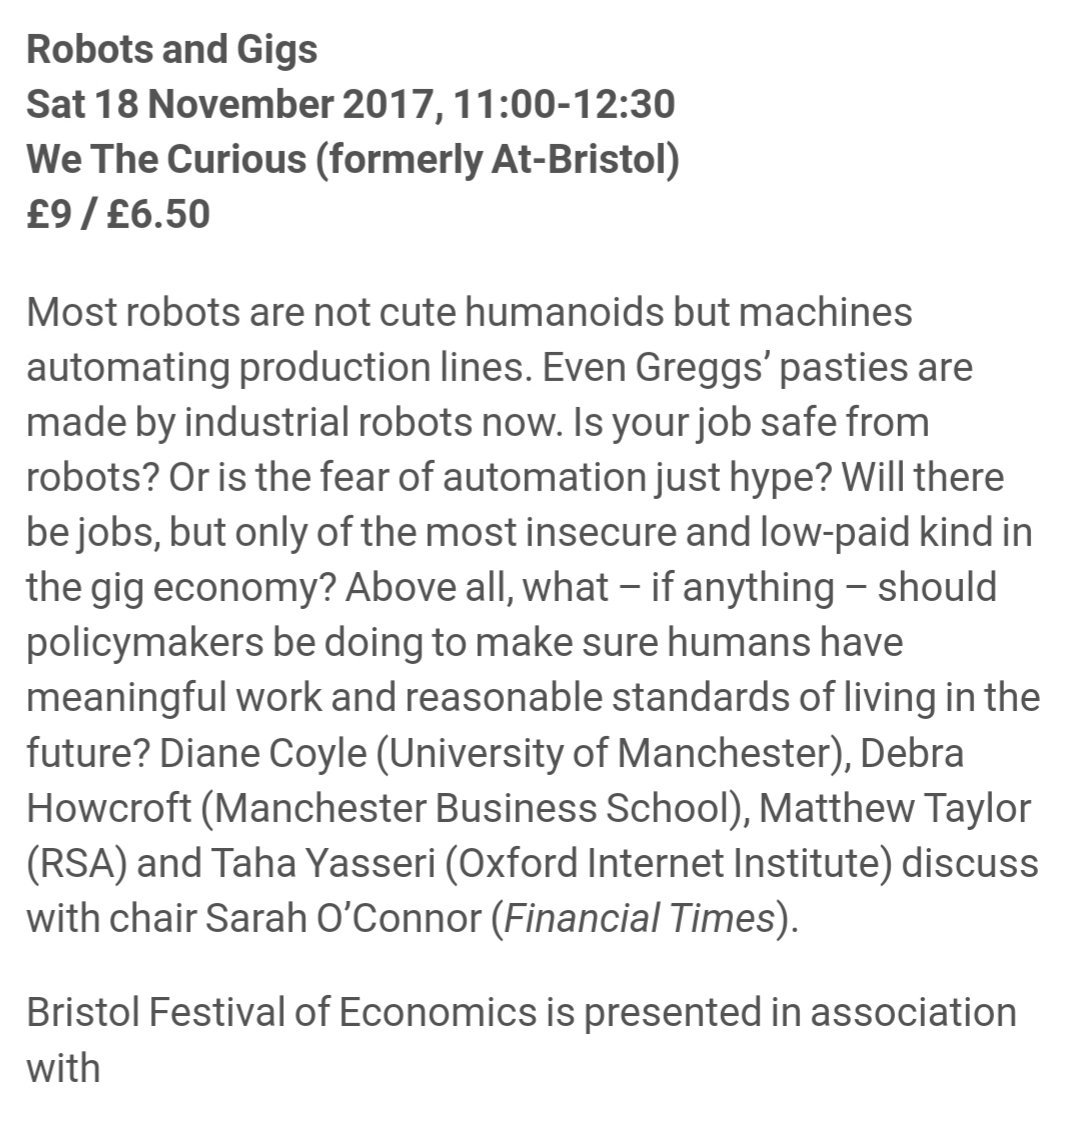 @FestivalofIdeas #economicsfest Fantastic discussion about the future at FOE this morning, great panel. 1/2 https://t.co/YGDDLULi81